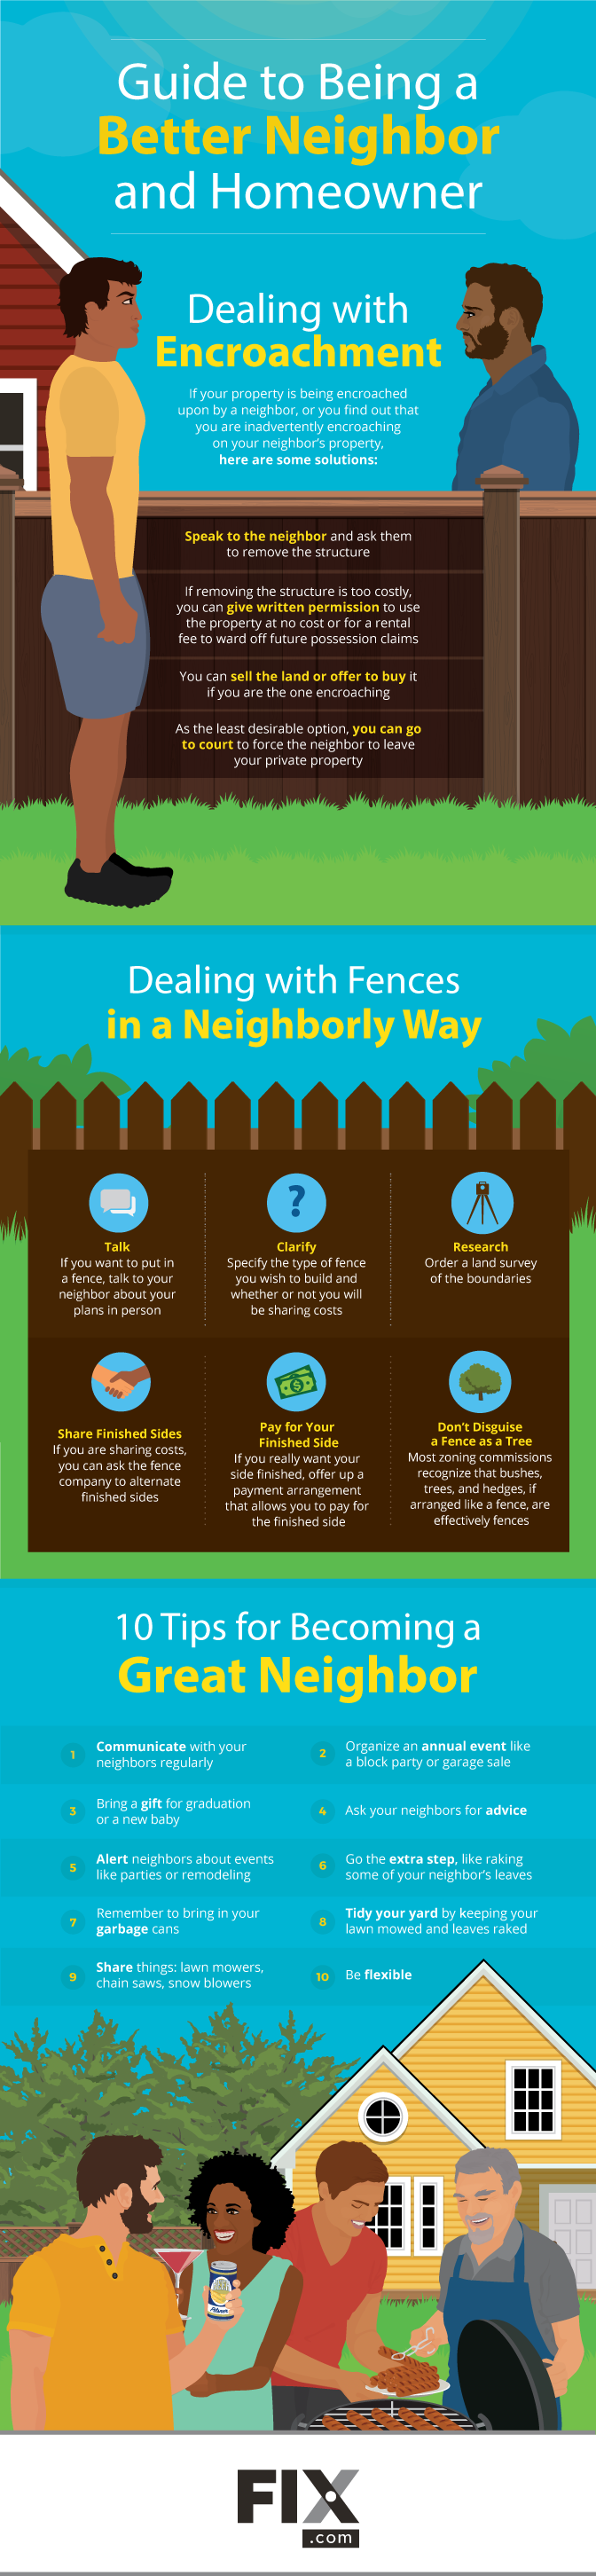 5 Types of Neighbors and How to Handle Them